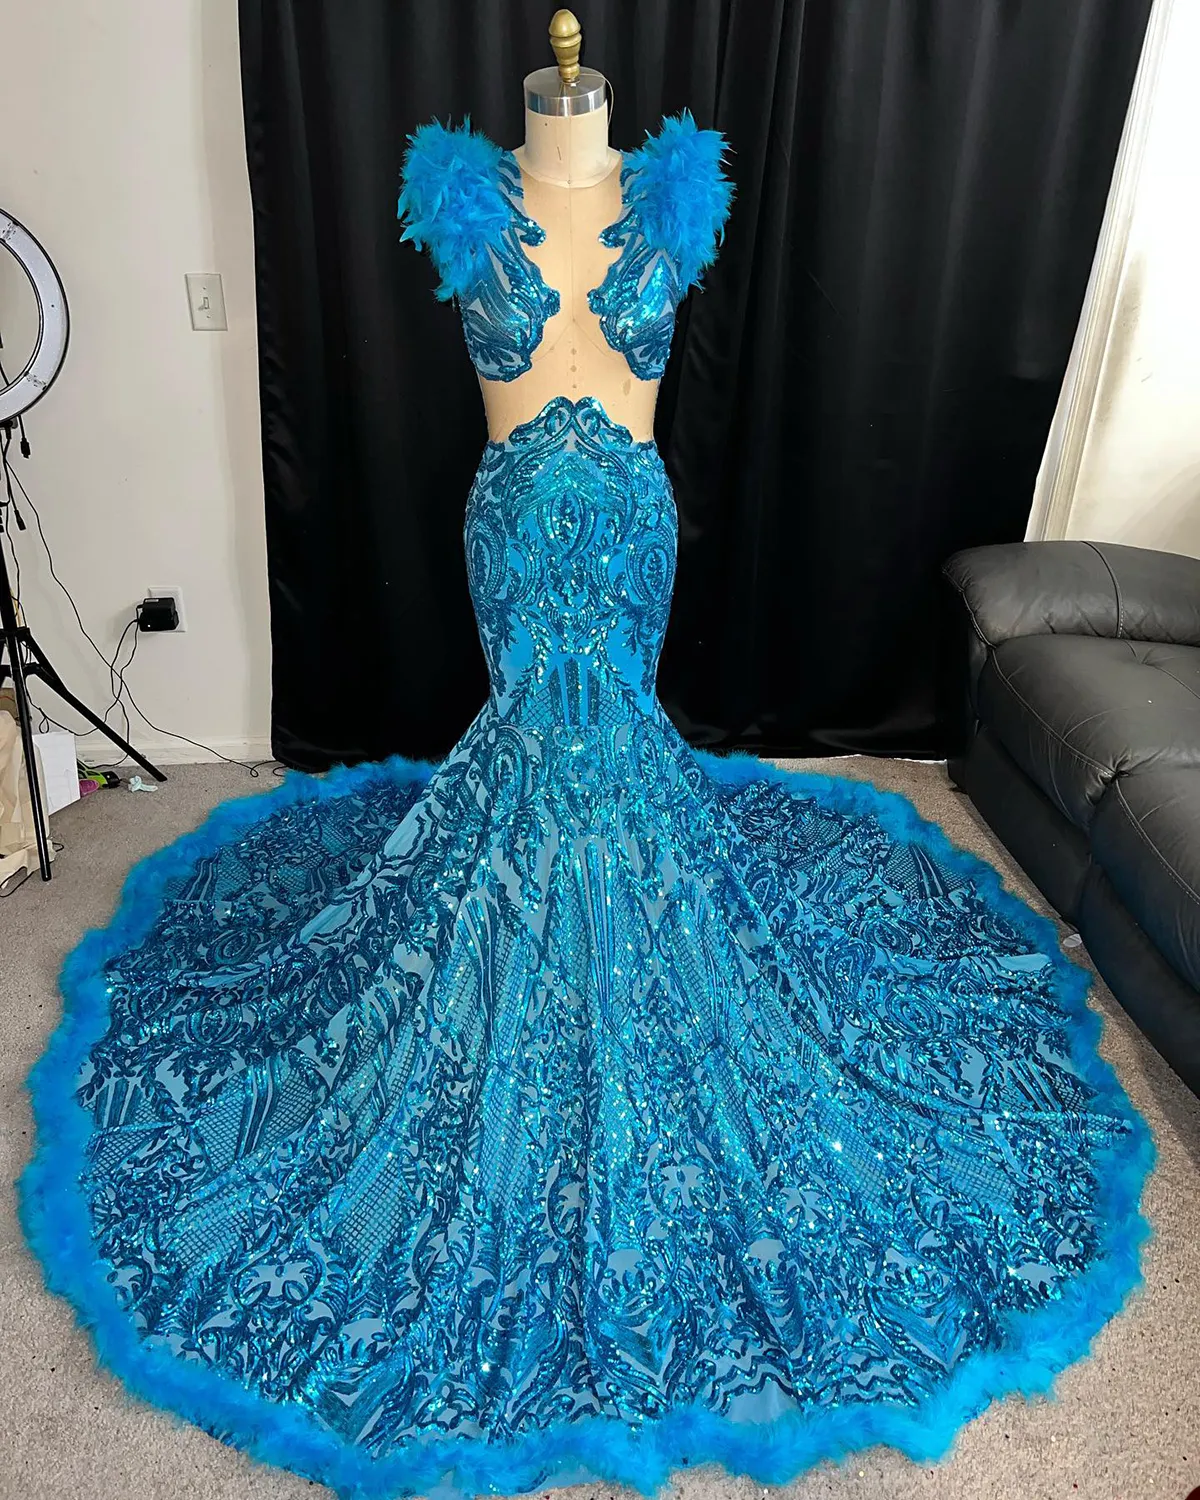 Gorgeous Mermaid Prom Dresses Illusion Feathers Appliques Lace Court Gown Sleeveless backless Zipper Custom Made Shining Party Evening Dress Vestido De Noite